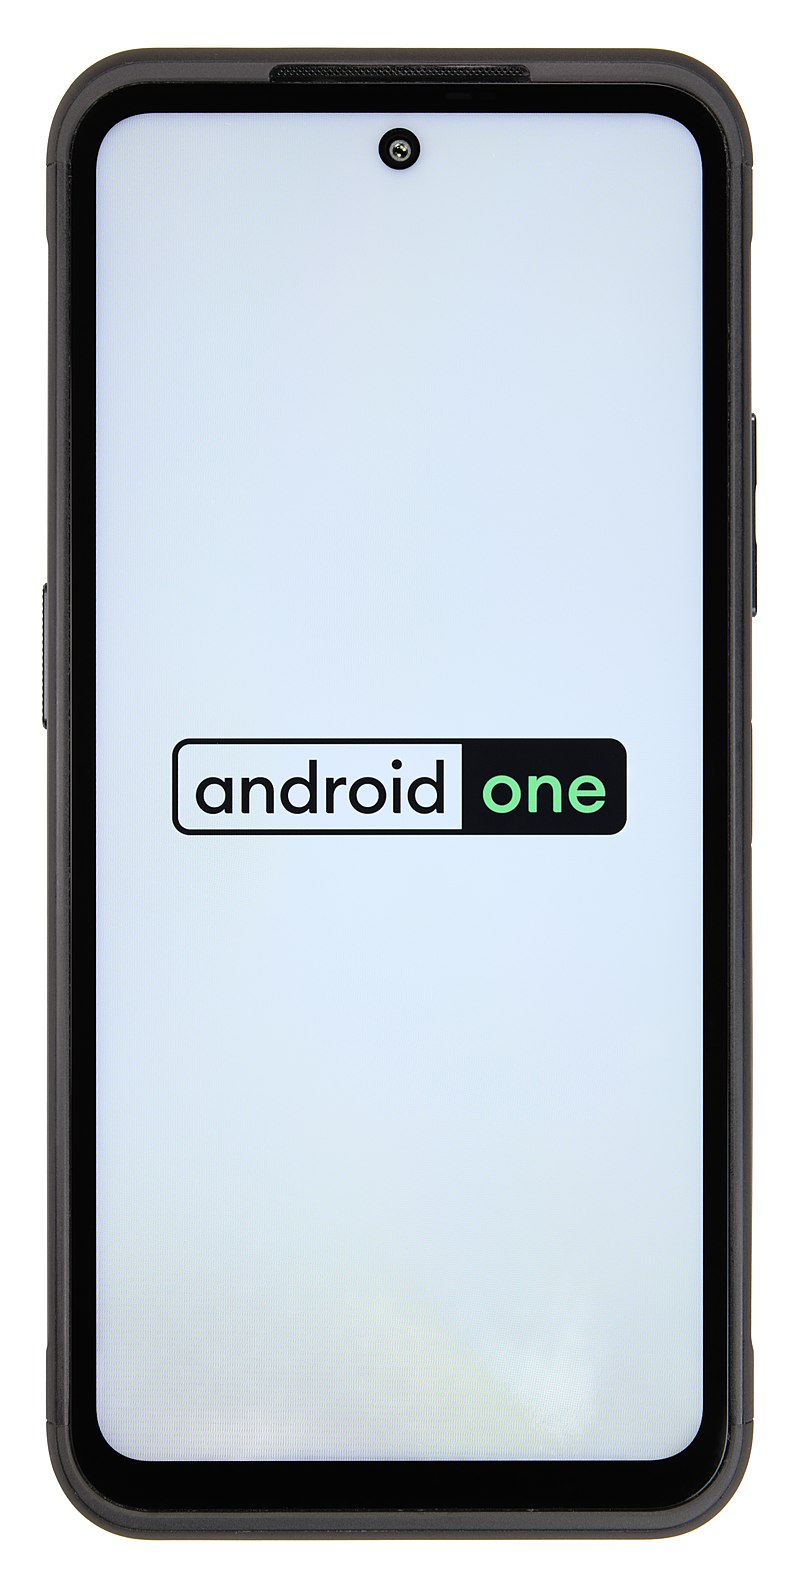 Android One - Wikipedia